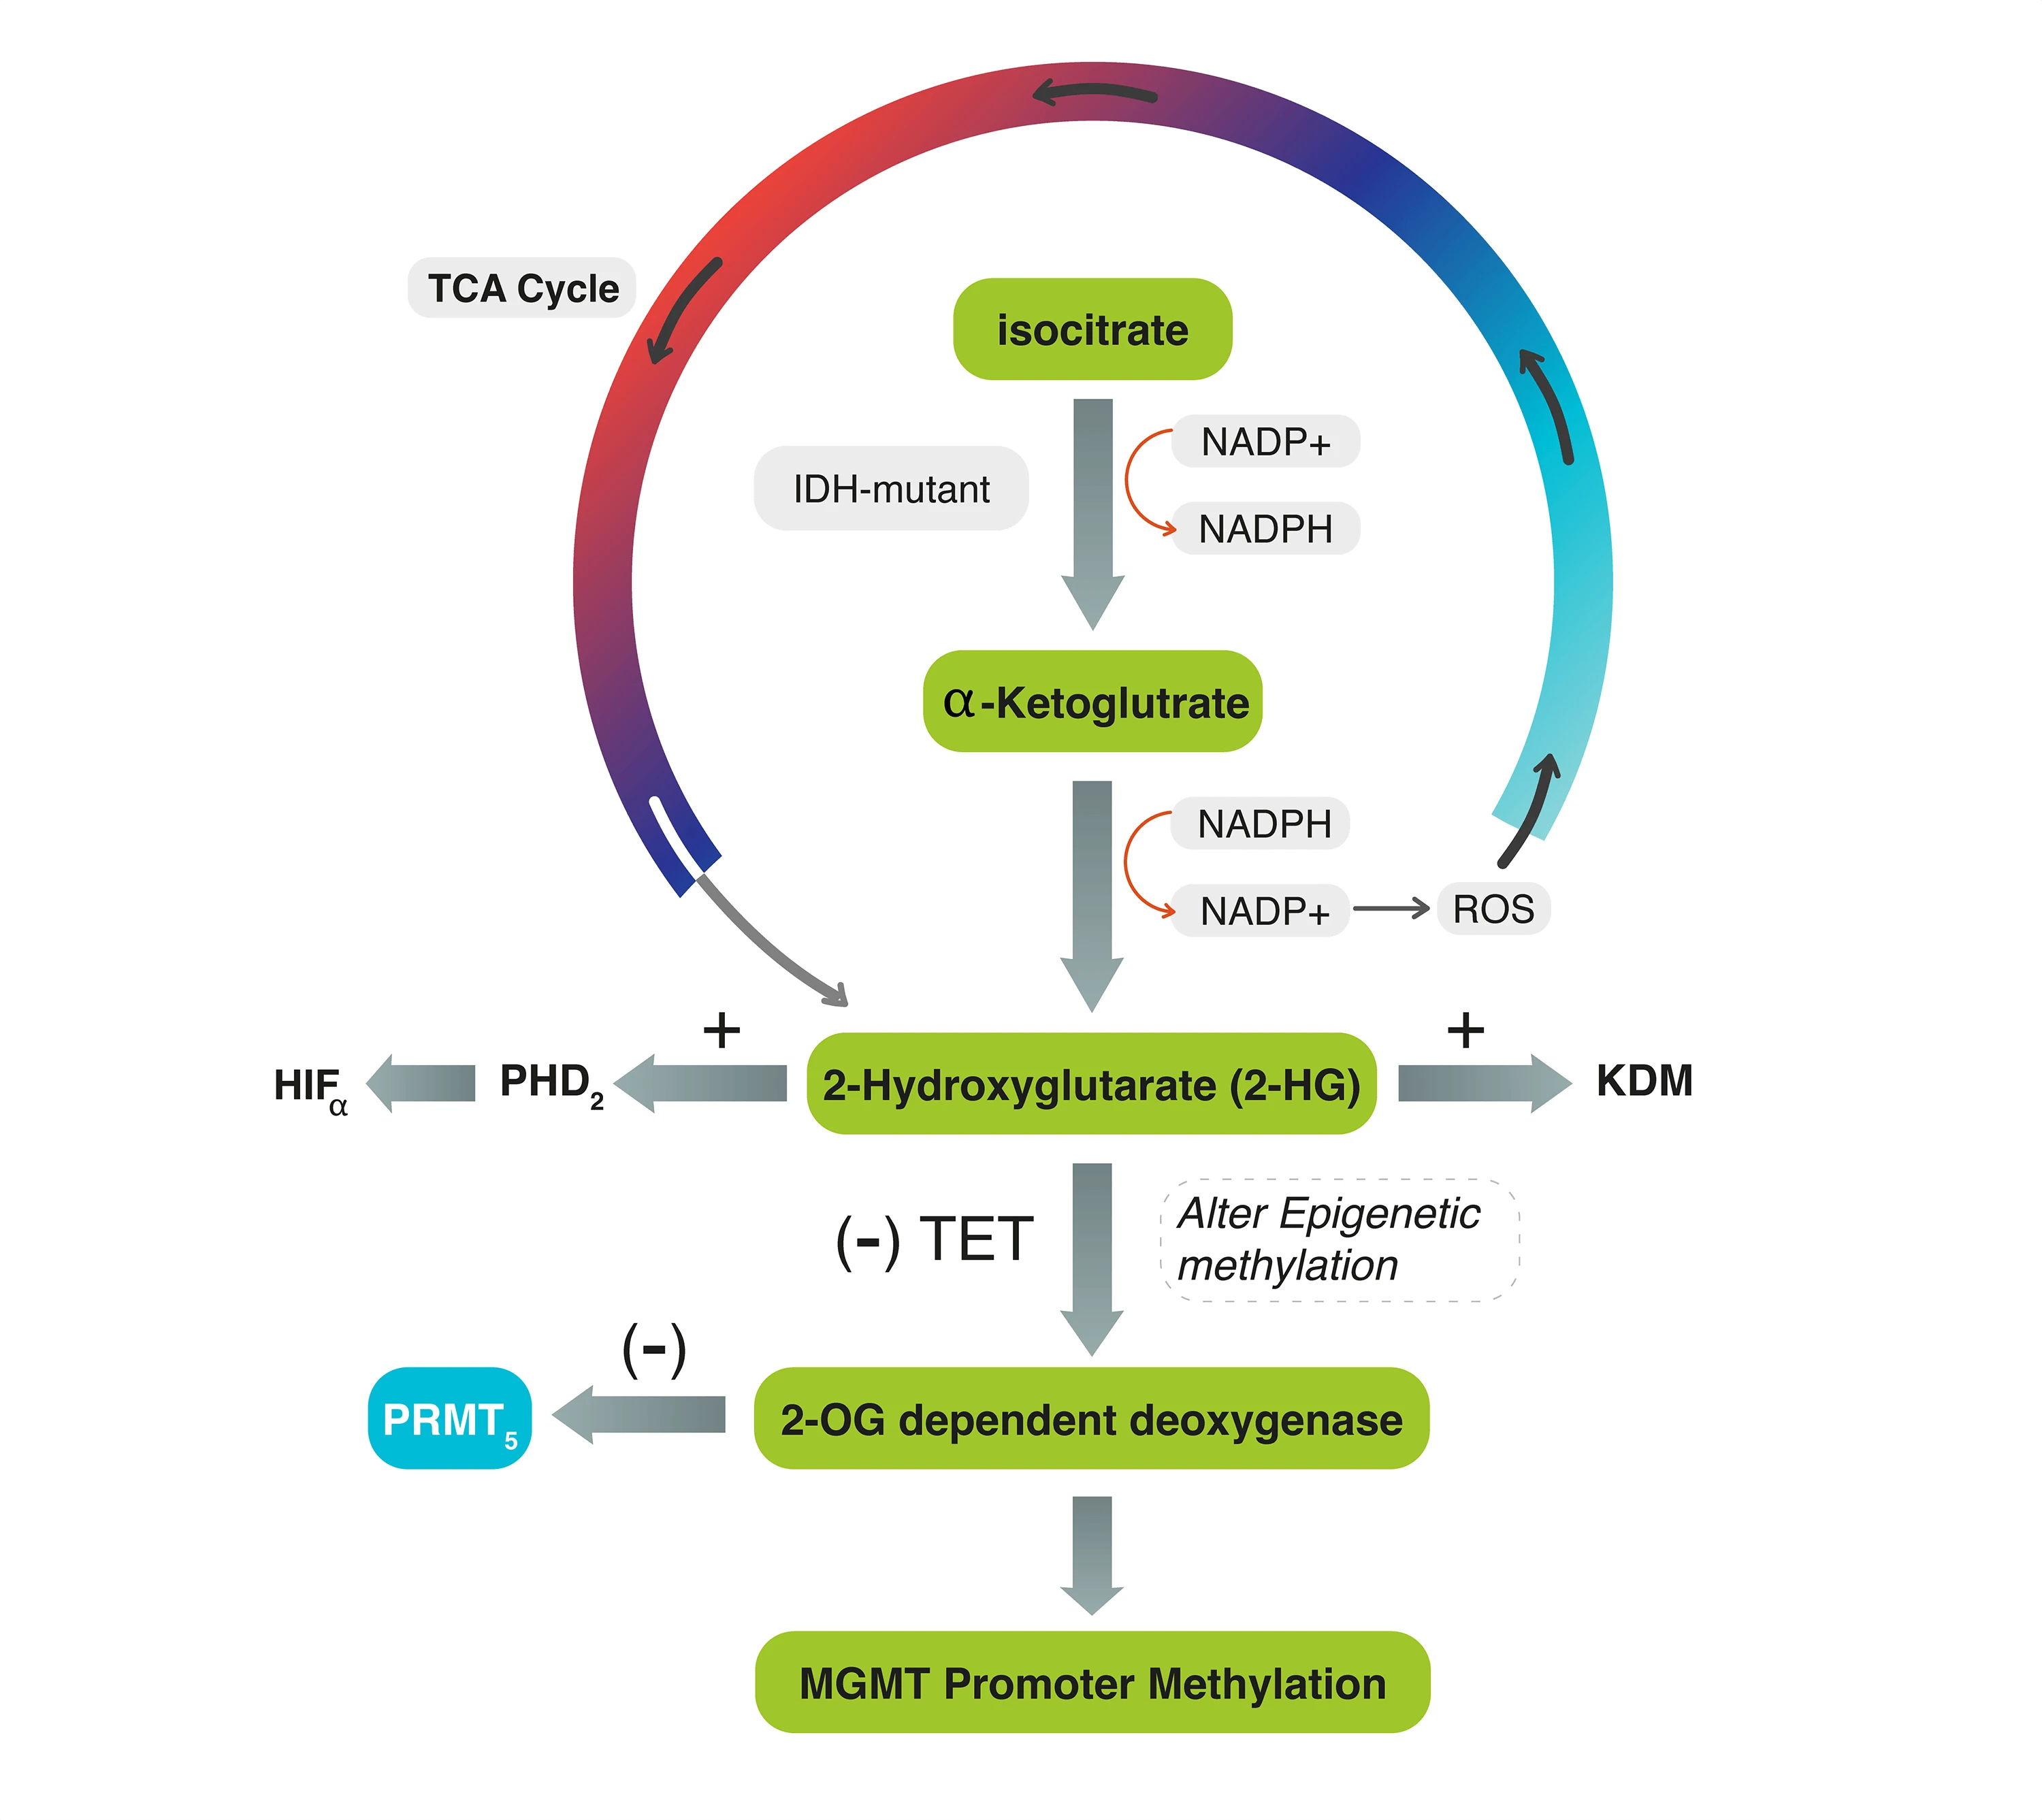 The interplay mechanism between IDH mutation, MGMT-promoter methylation, and PRMT5 activity in the progression of grade 4 astrocytoma: unraveling the complex triad theory